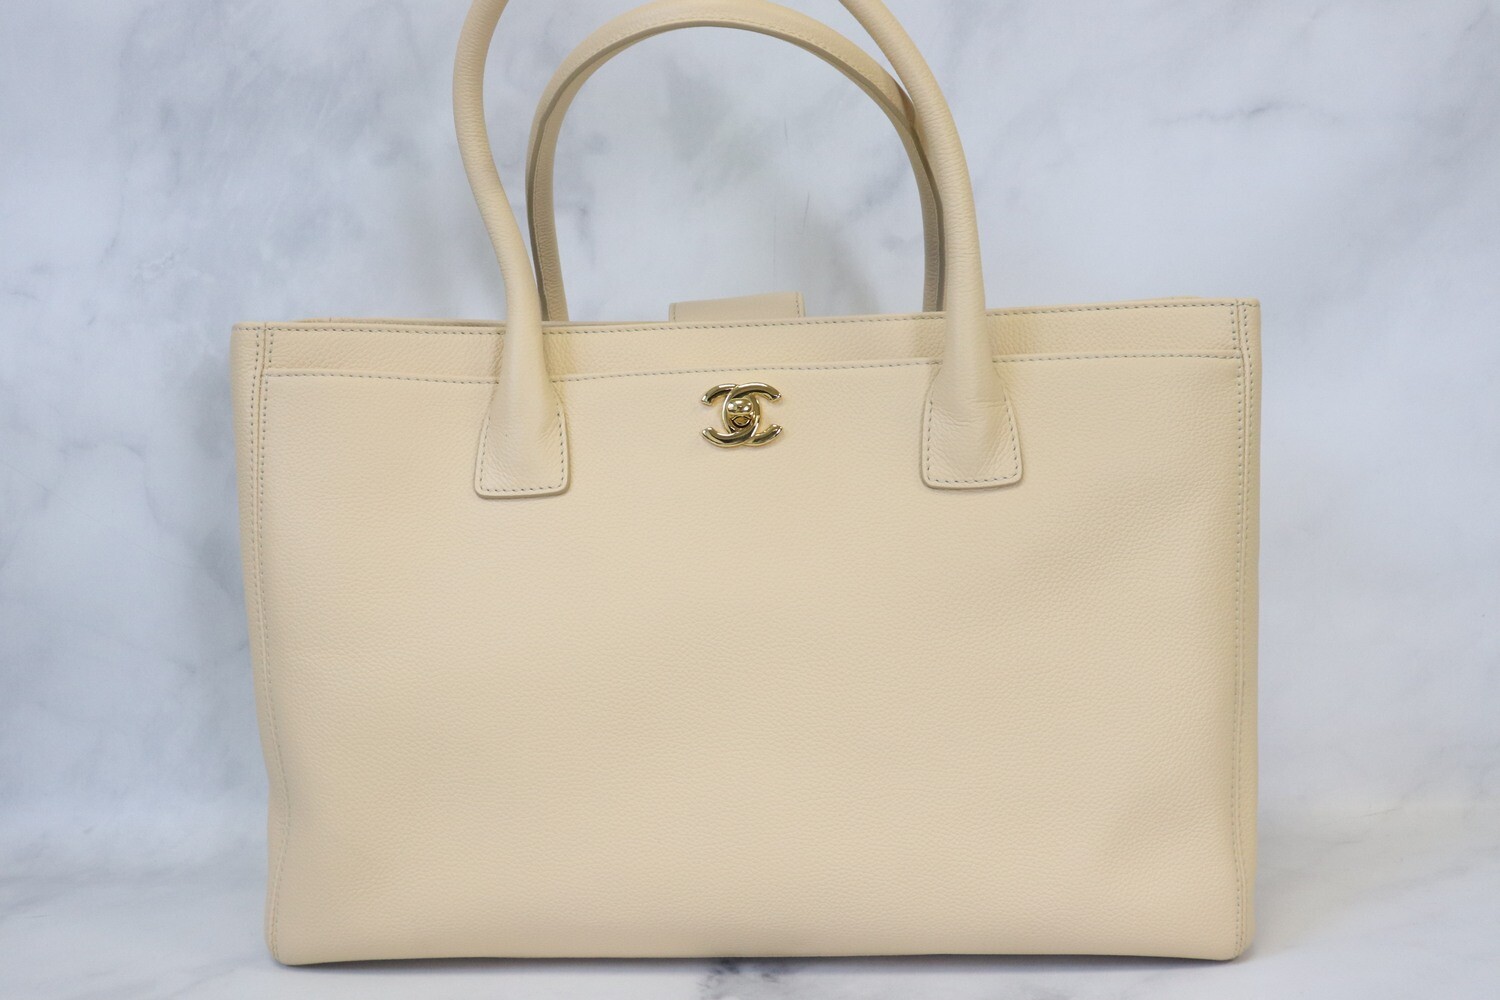 Chanel Cert Executive Tote Bag, Beige Caviar Leather, Gold